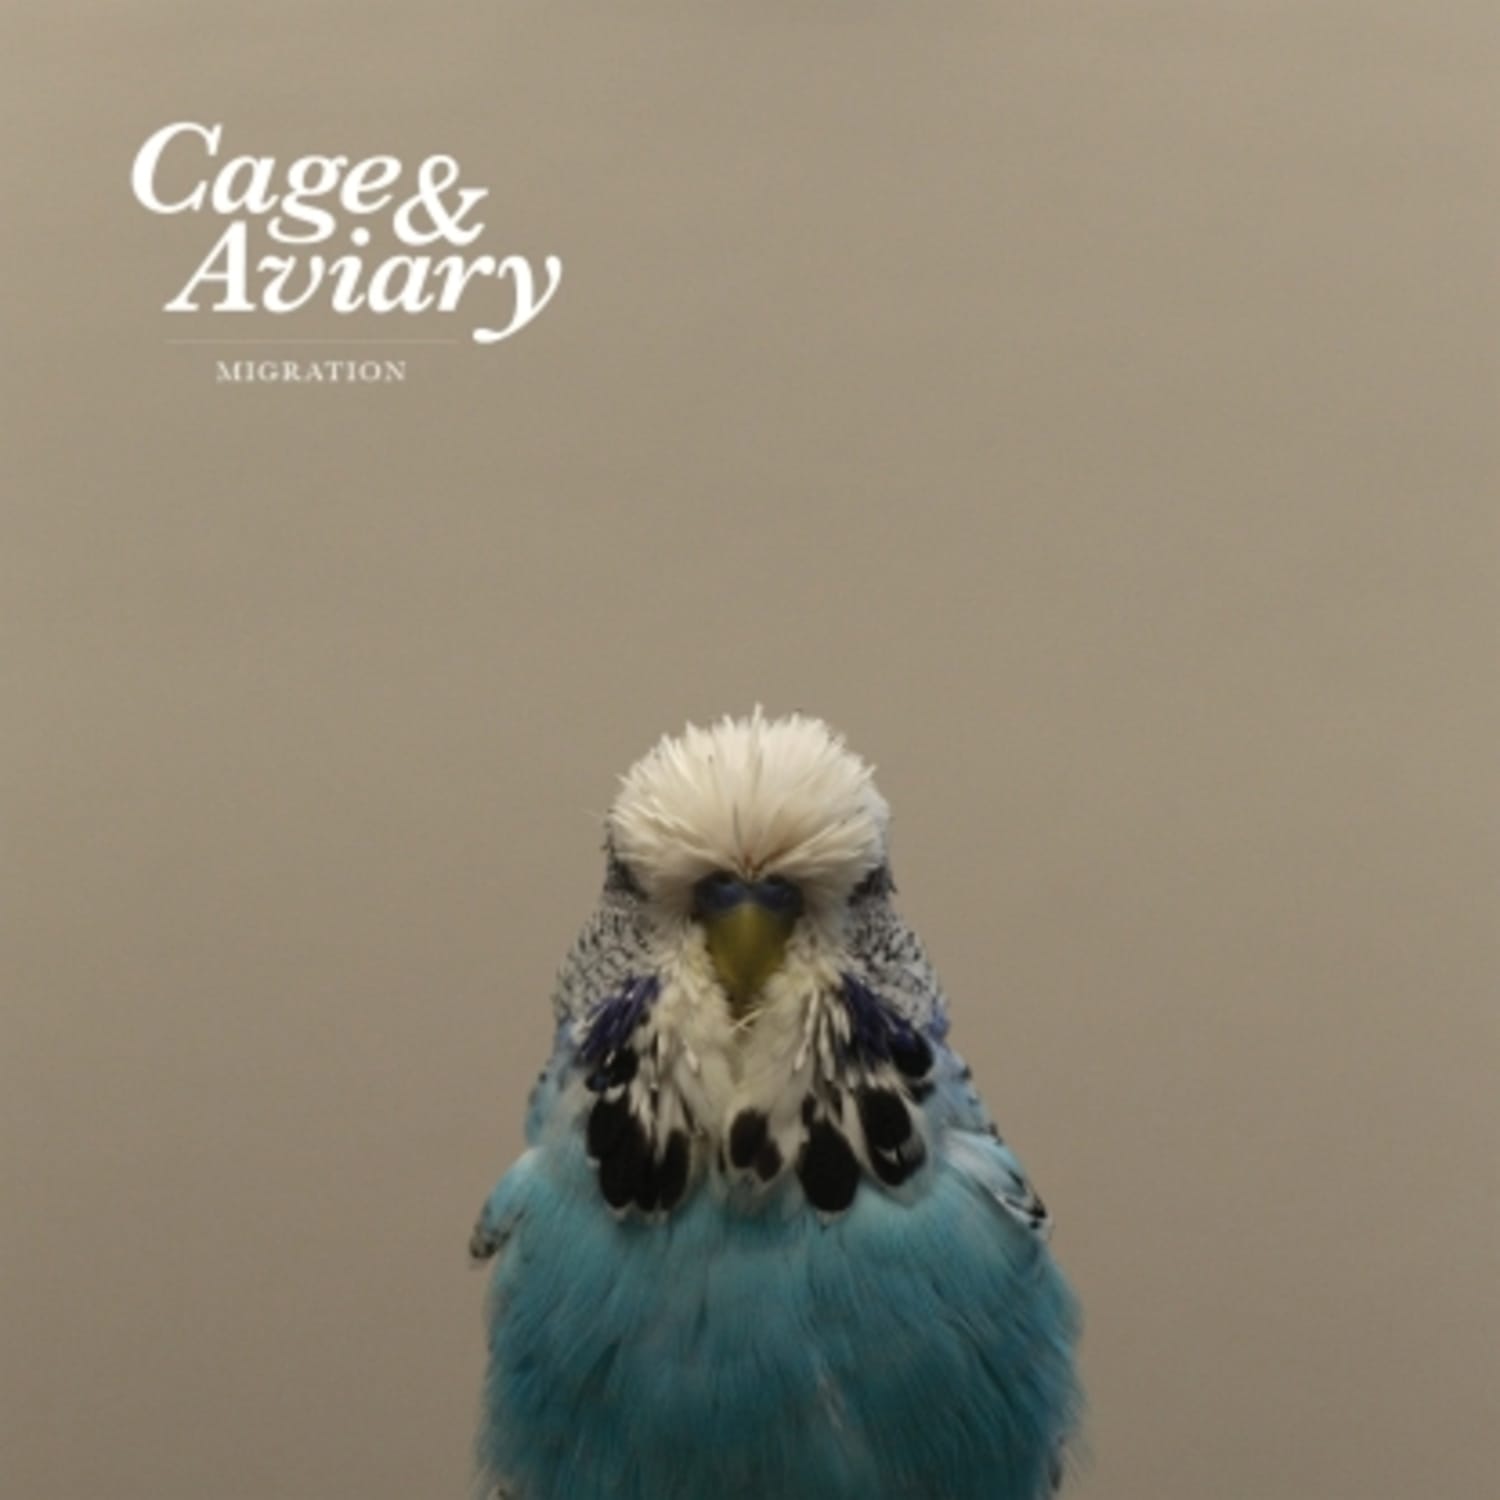 Cage & Aviary - Migration : 2LP